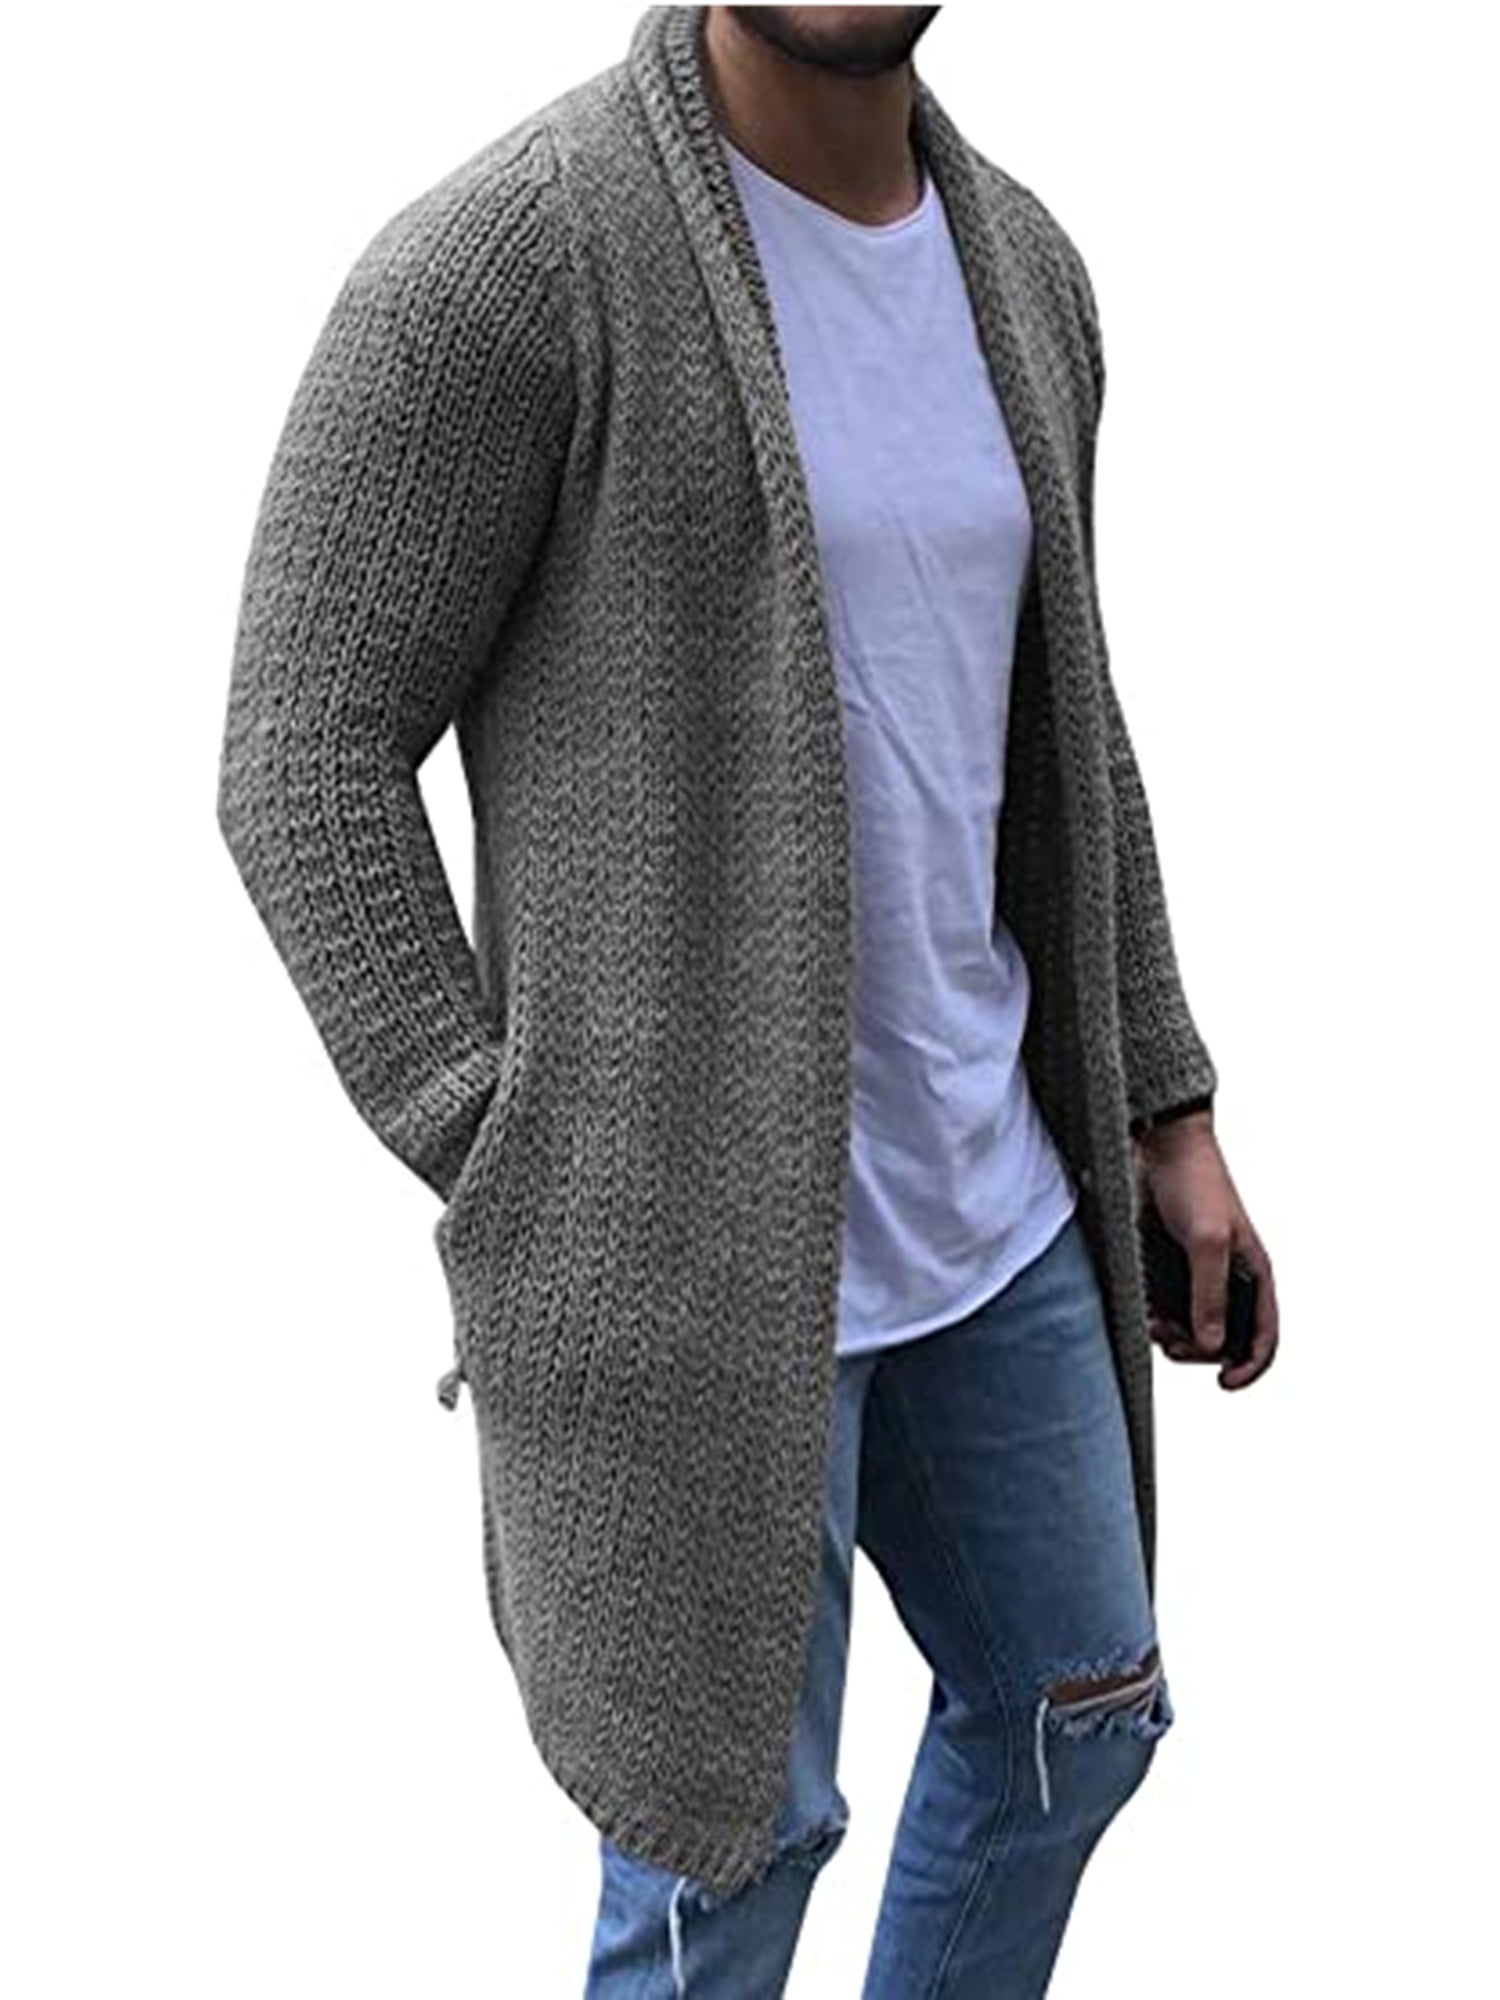 Zimaes-Men Solid Lapel Long Sleeved Knitted Open Front Cardigan Sweater 